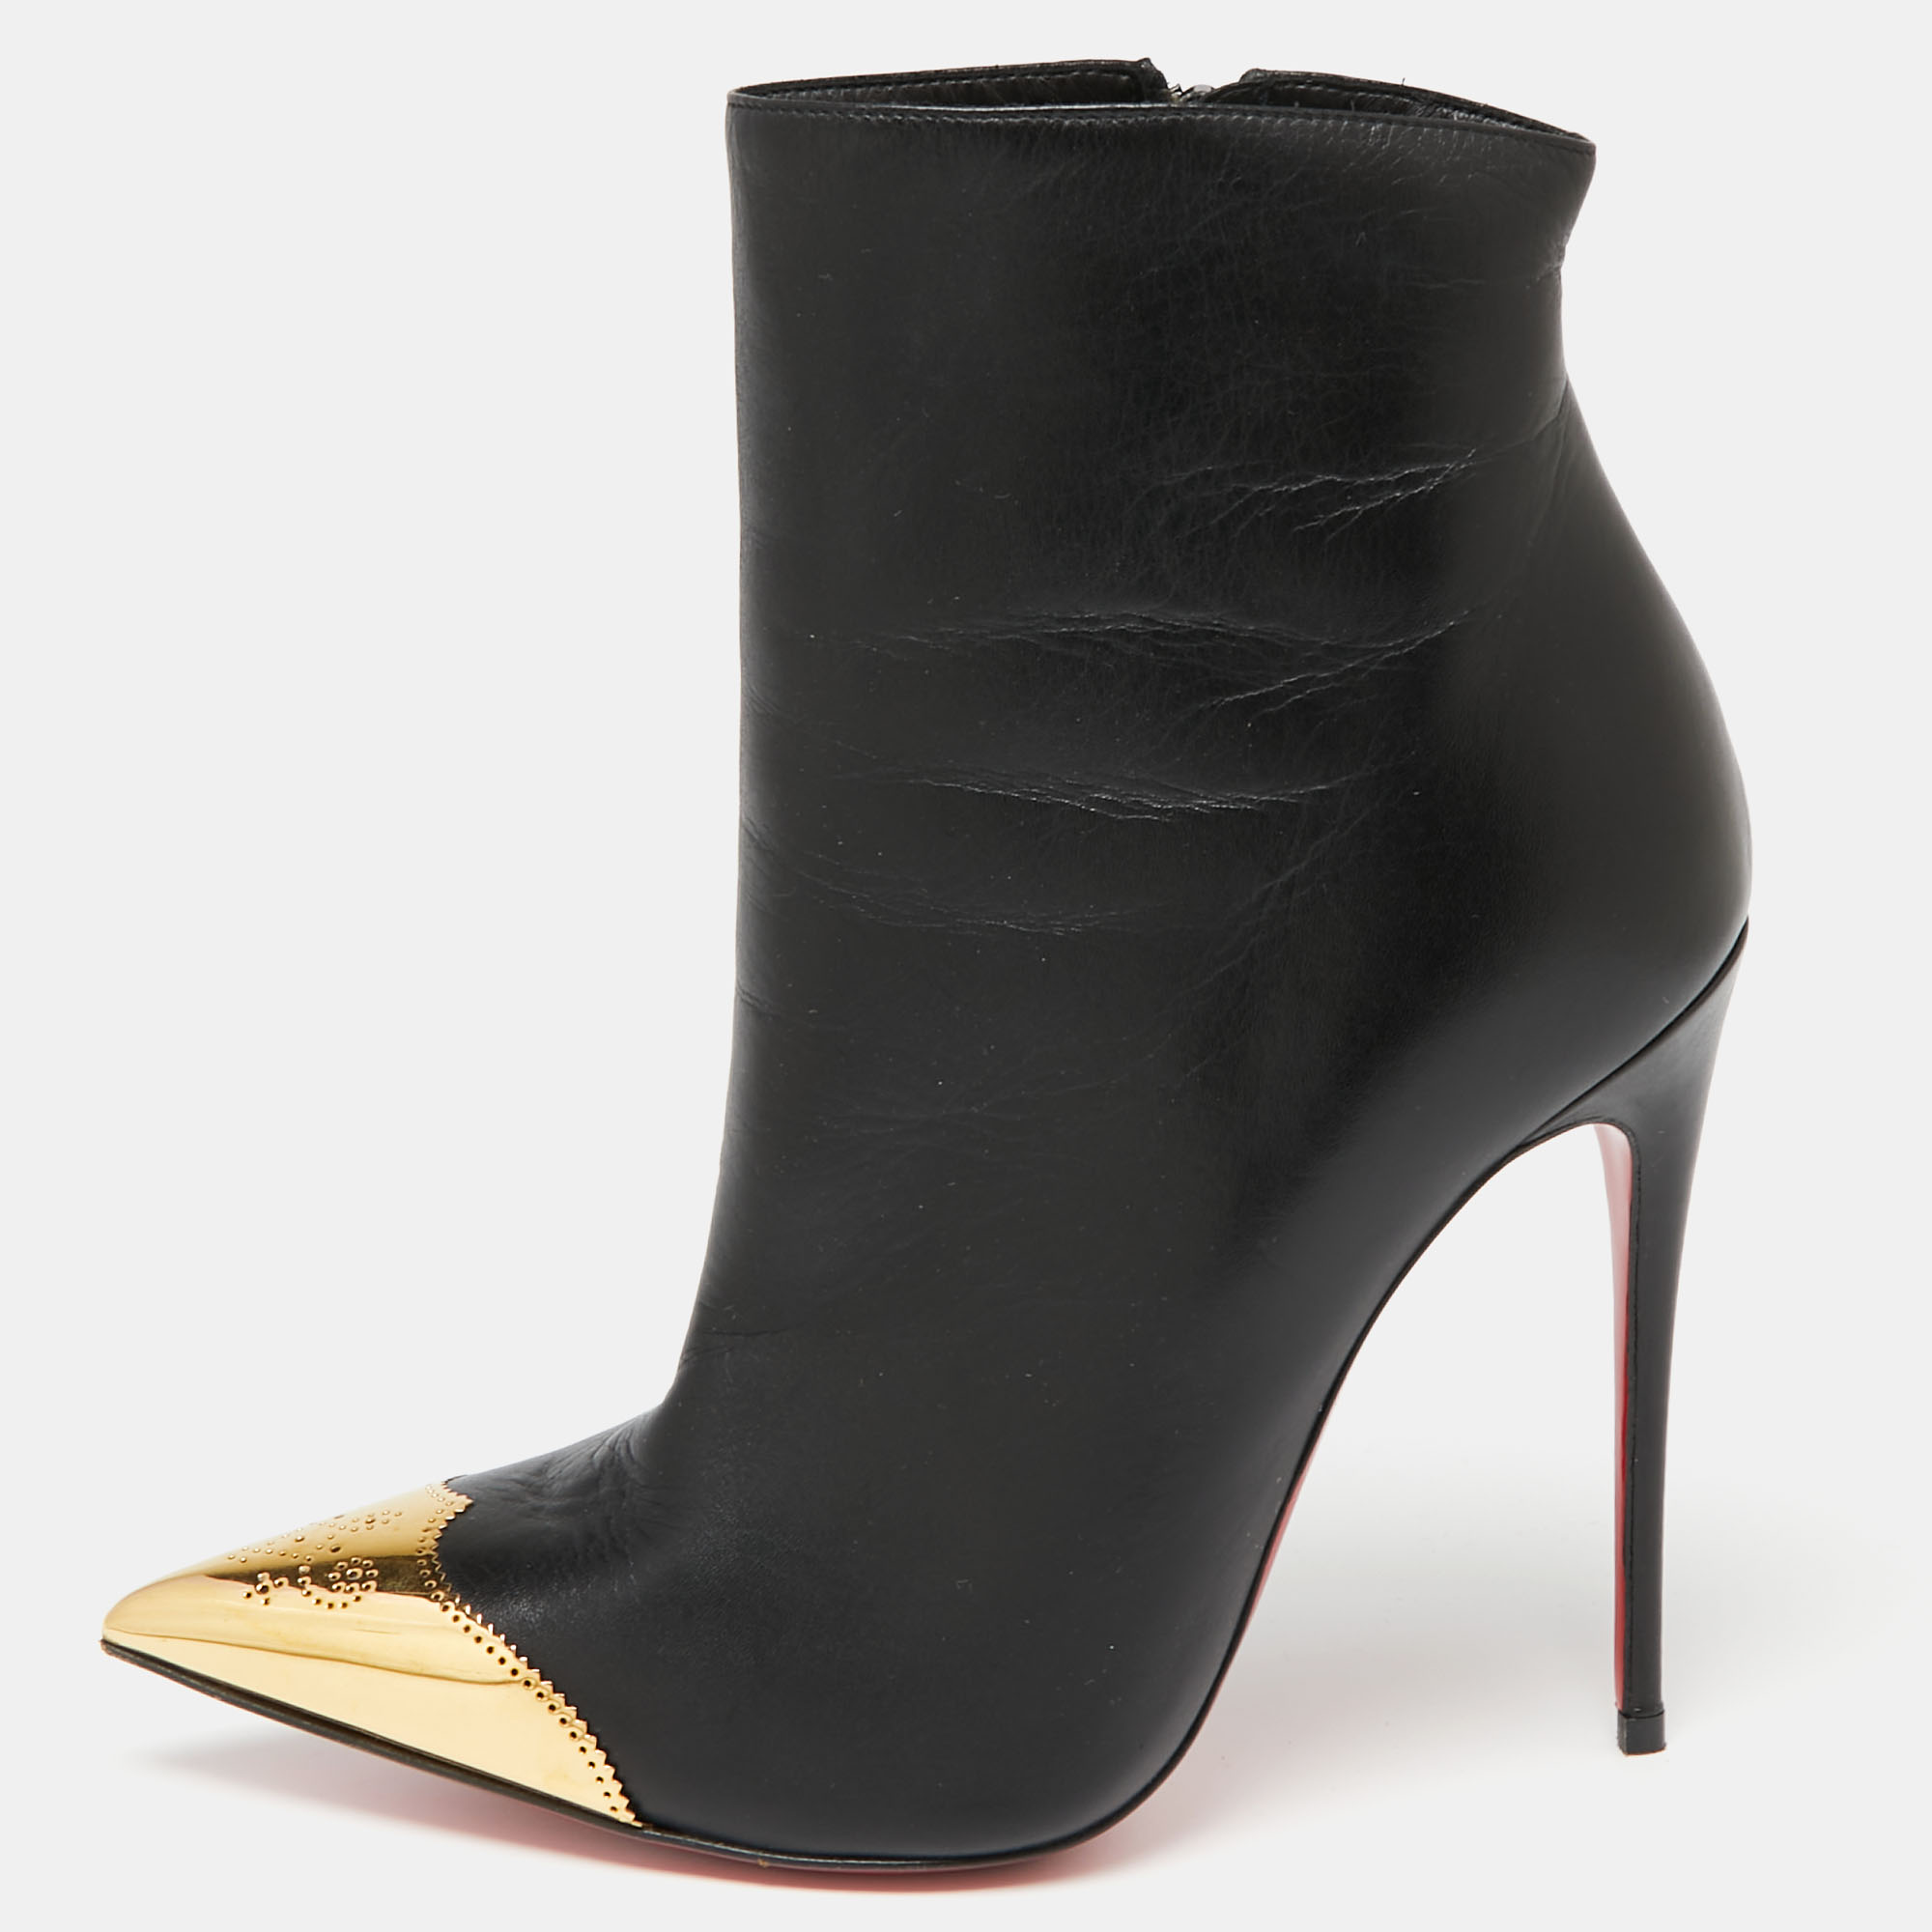 Christian Louboutin Black Leather Calamijane Pointed-Toe Ankle Booties Size 35.5